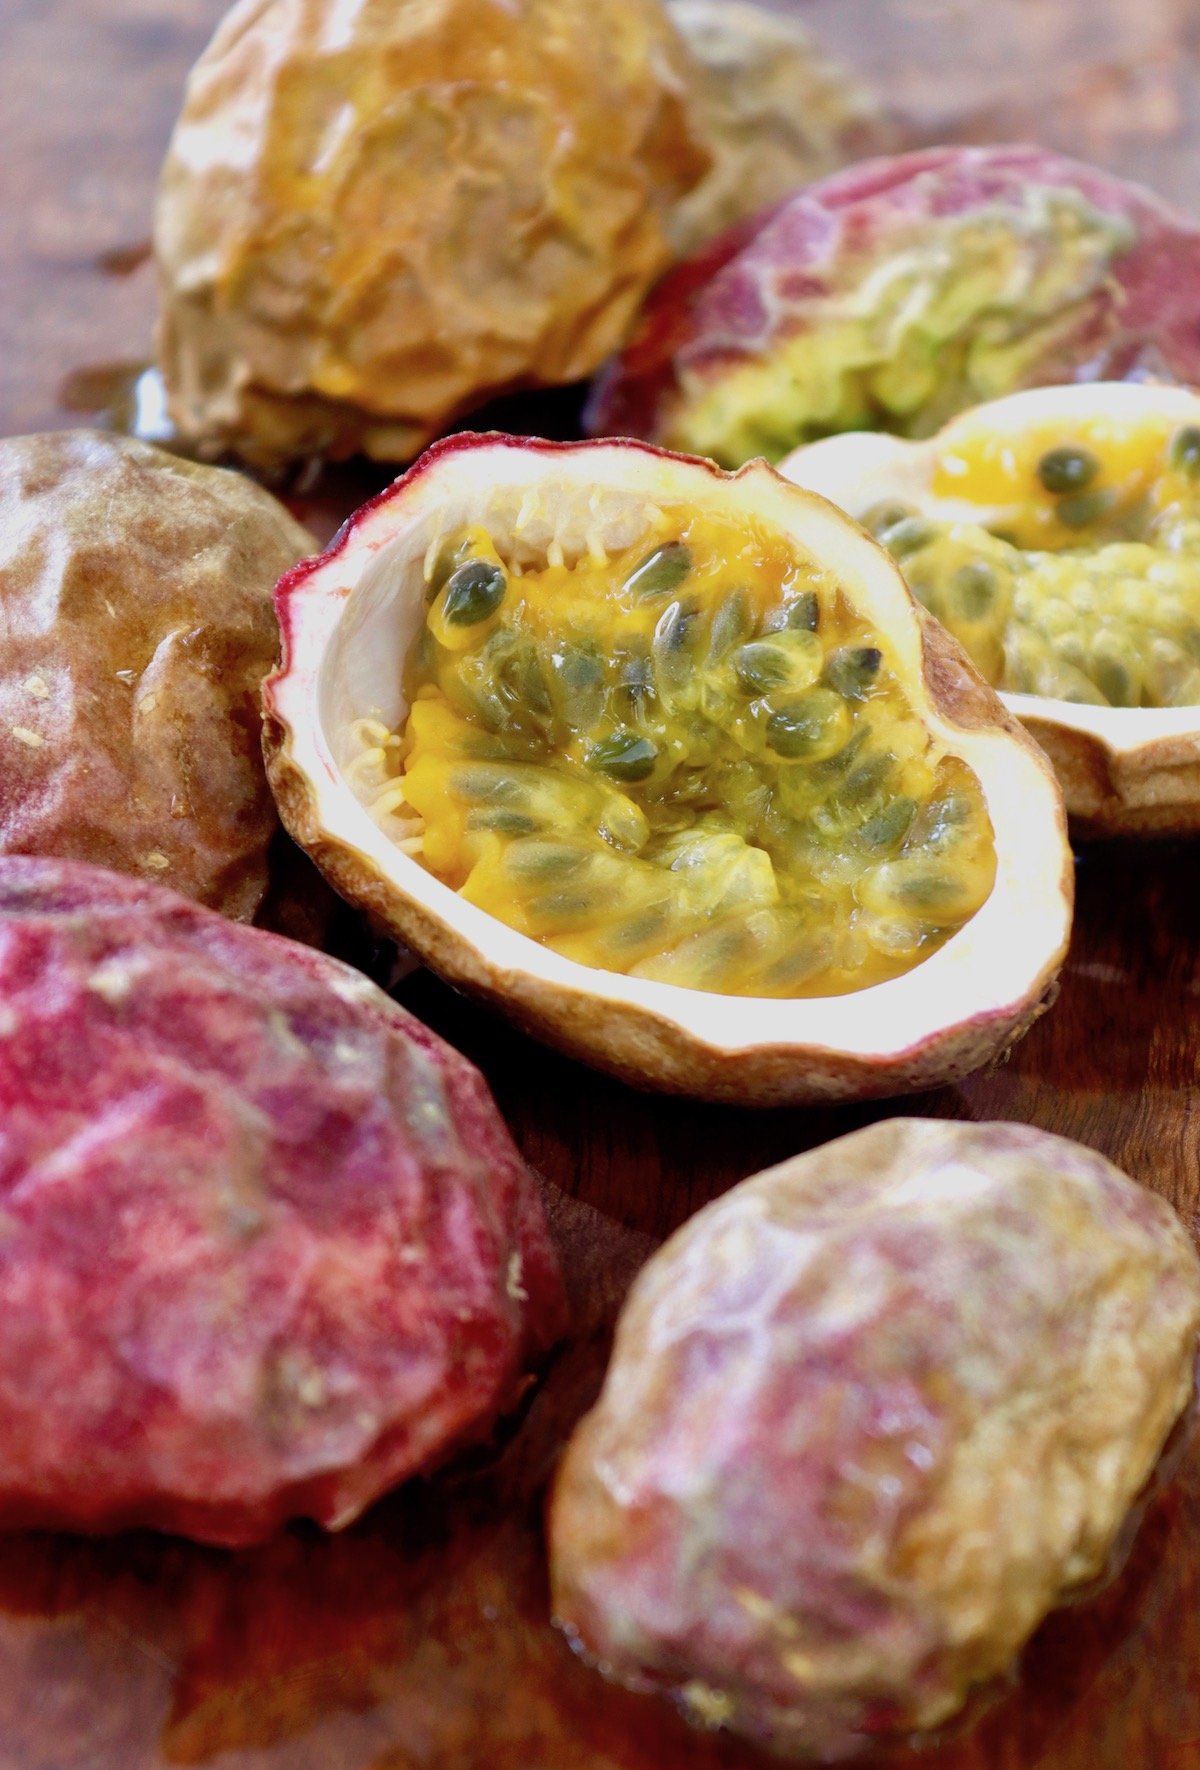 Many passion fruit skins and one facing up with pulp still inside.